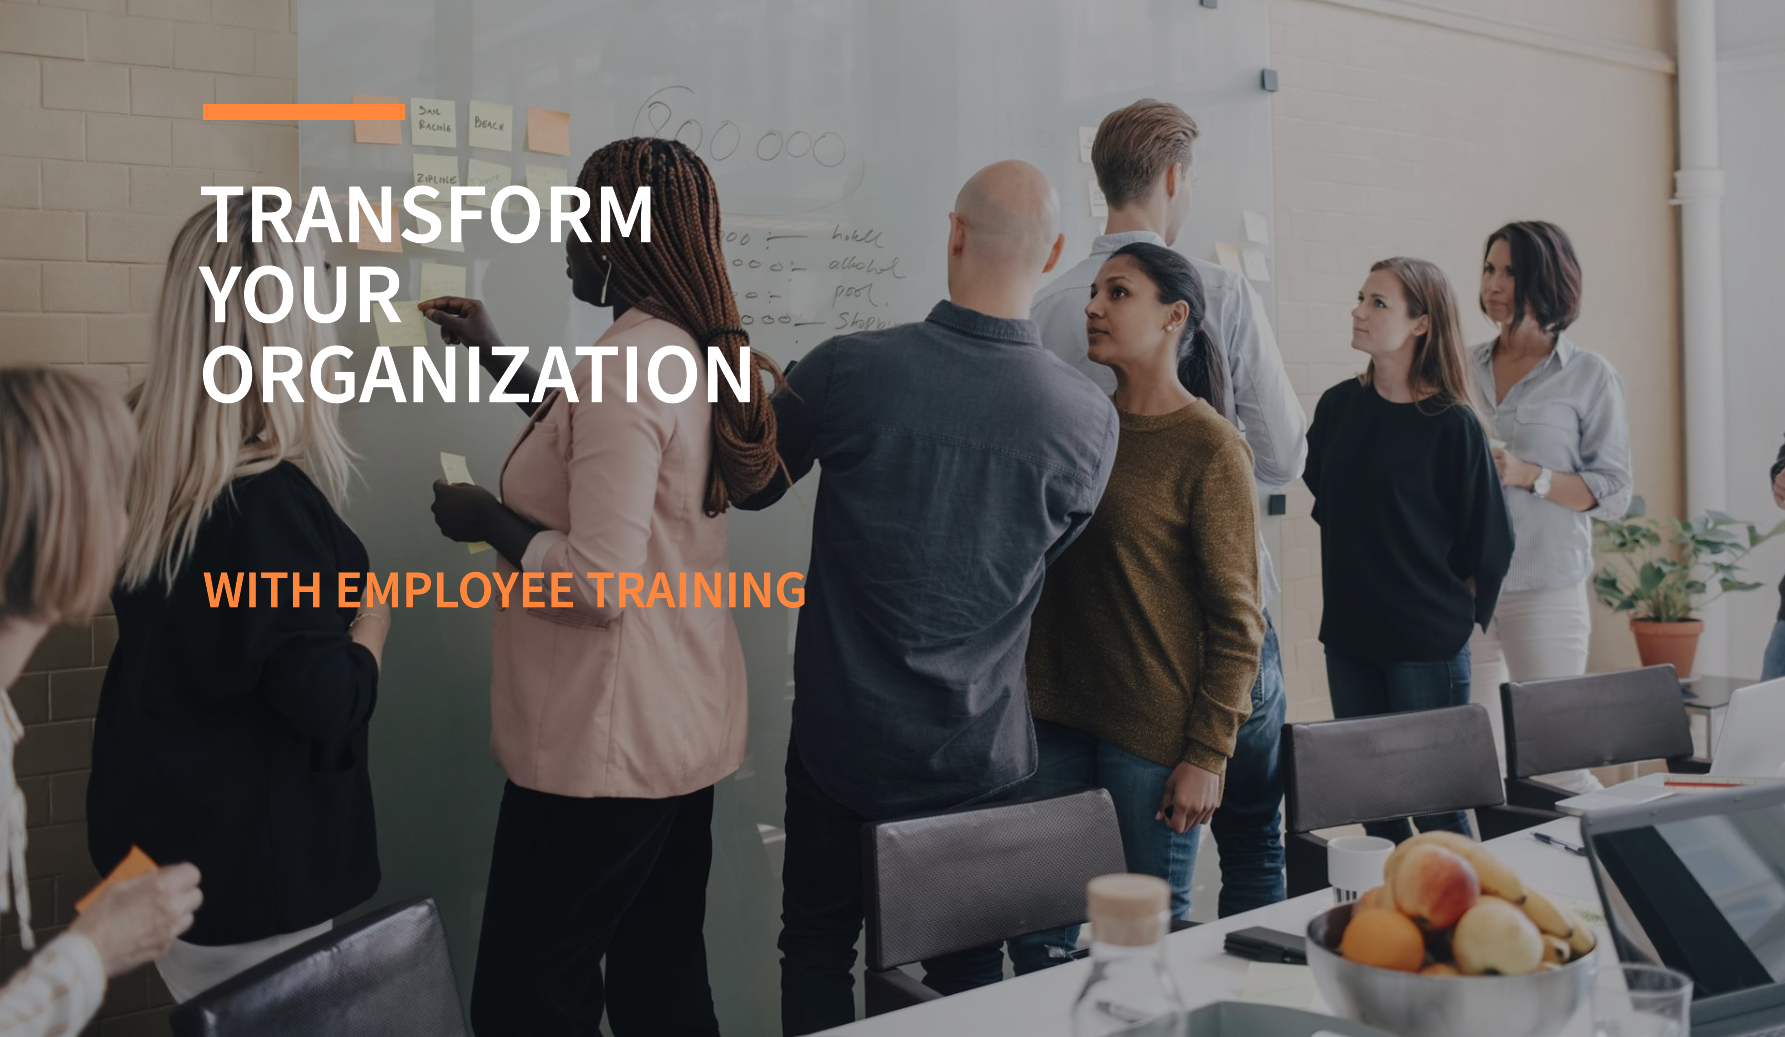 How corporate training company can transform an organization and employee